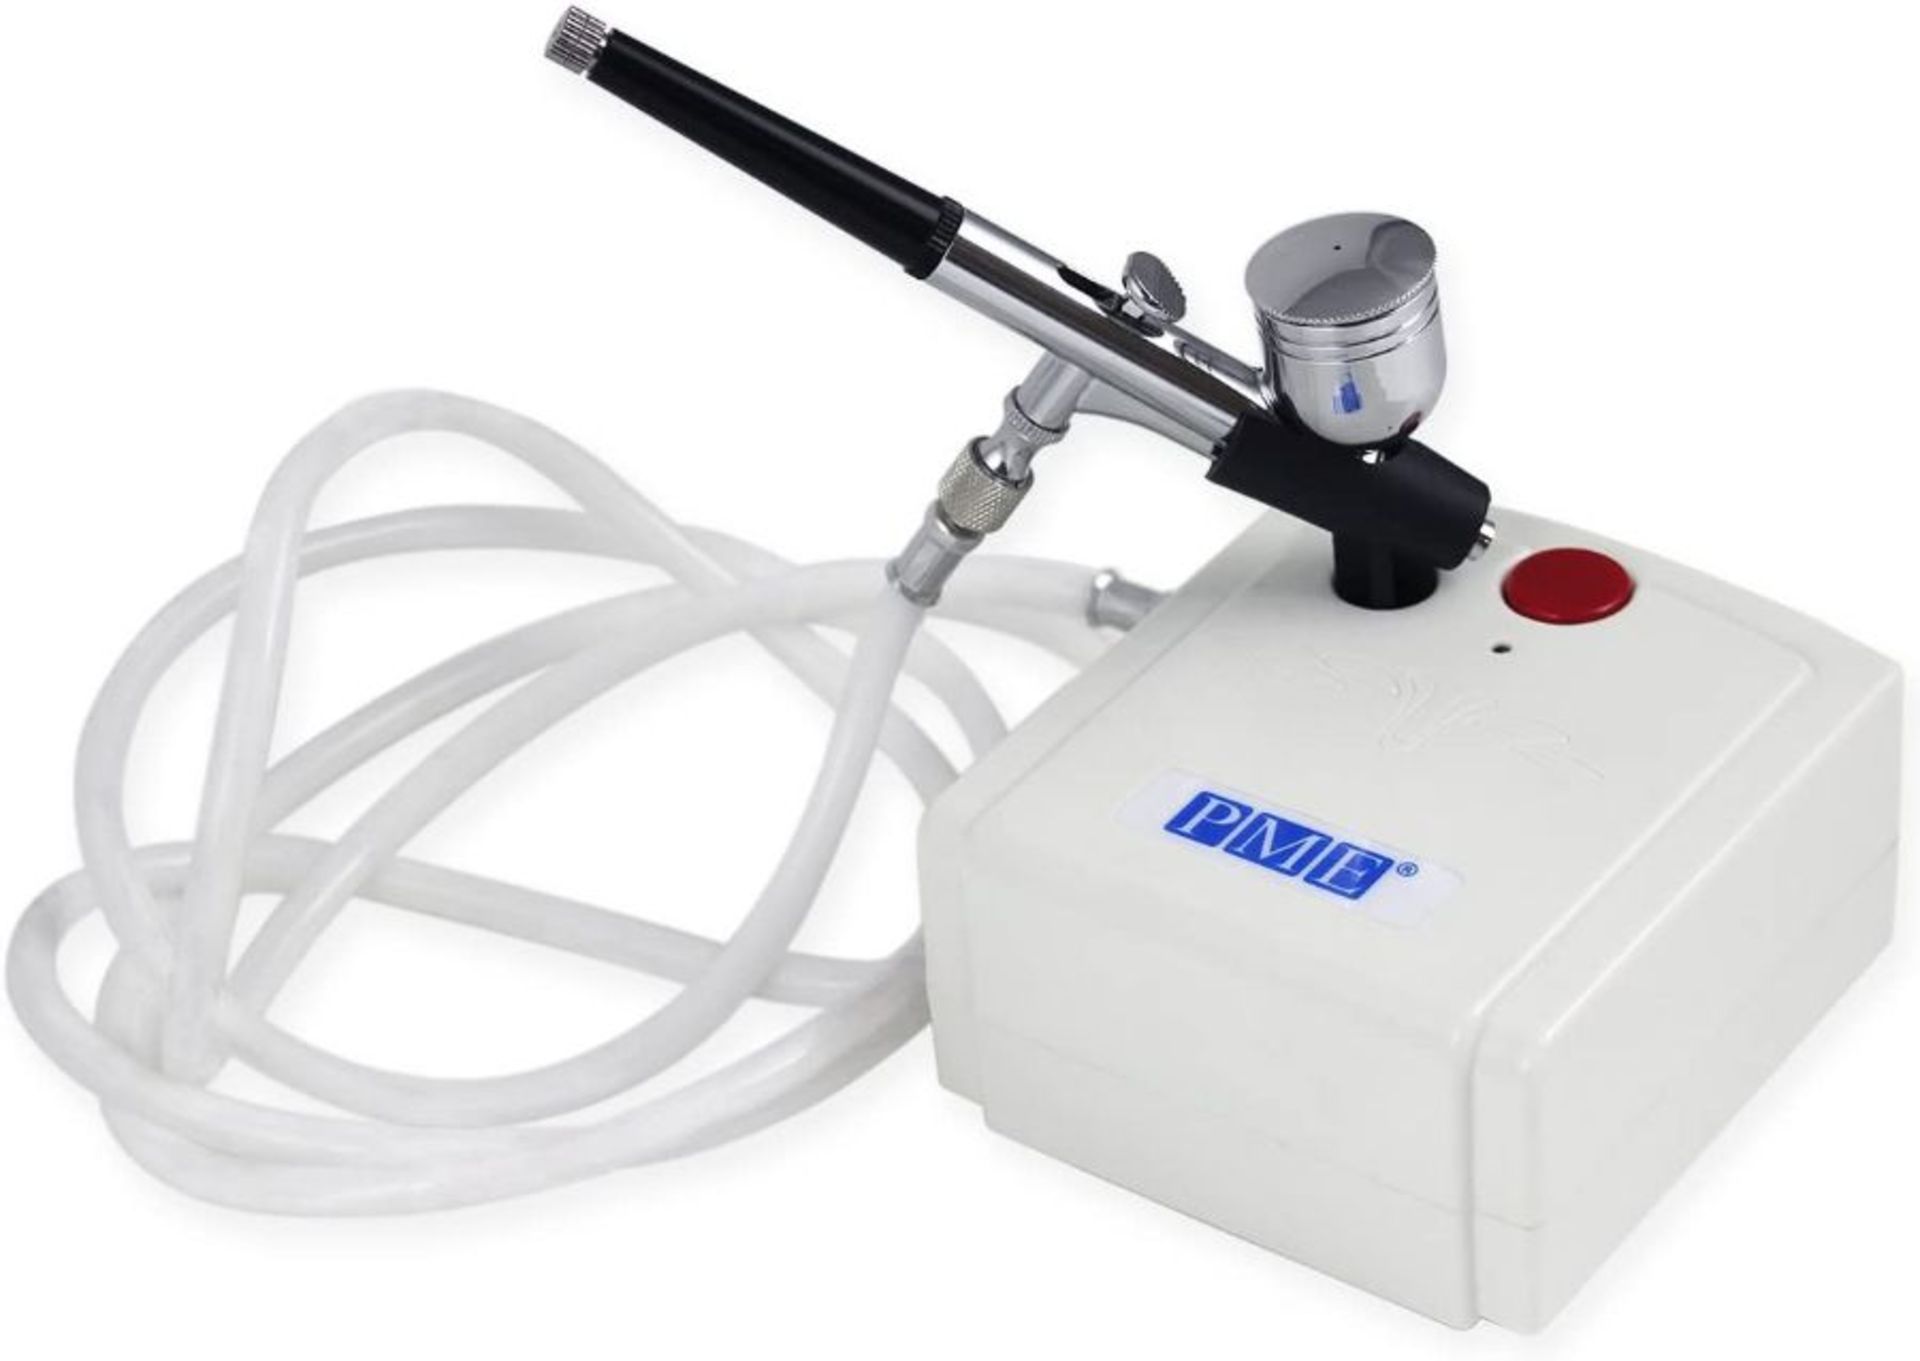 PME AB132 Airbrush & Compressor Kit for Cake Craft and Cake Decorating White 10 x 10 x 5 cm RRP -£47